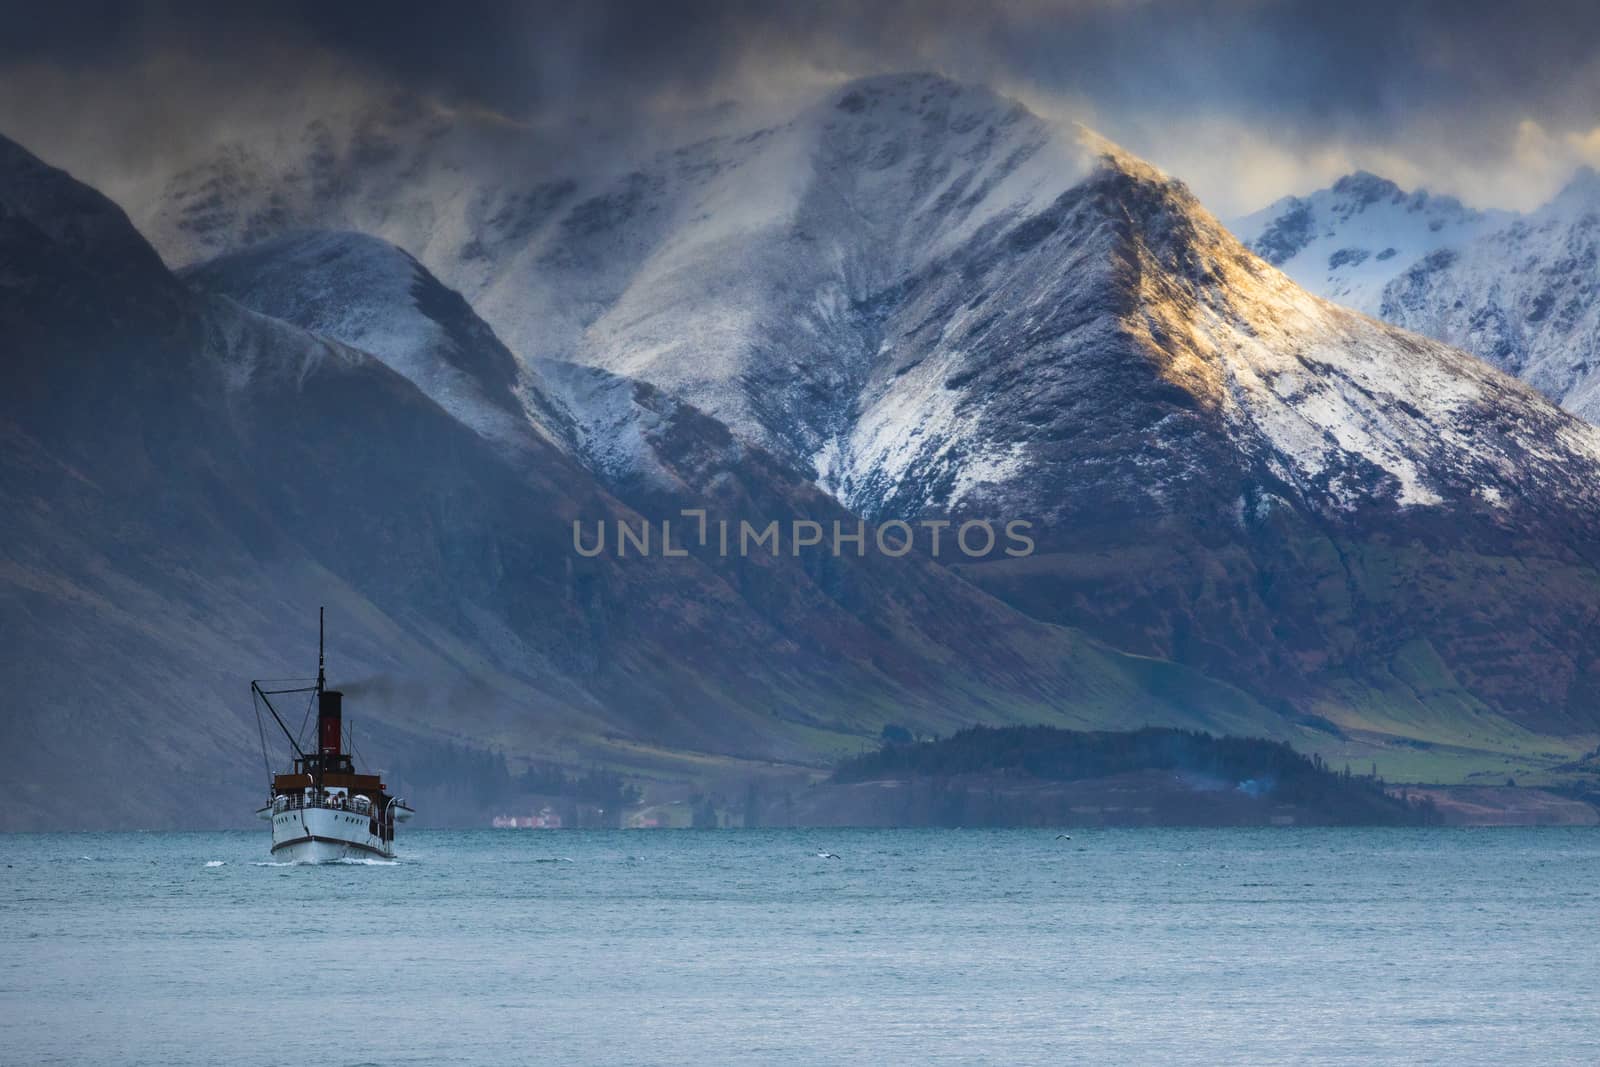 beautiful scenic of old steam engine boat in wakatipu lake queen by khunaspix